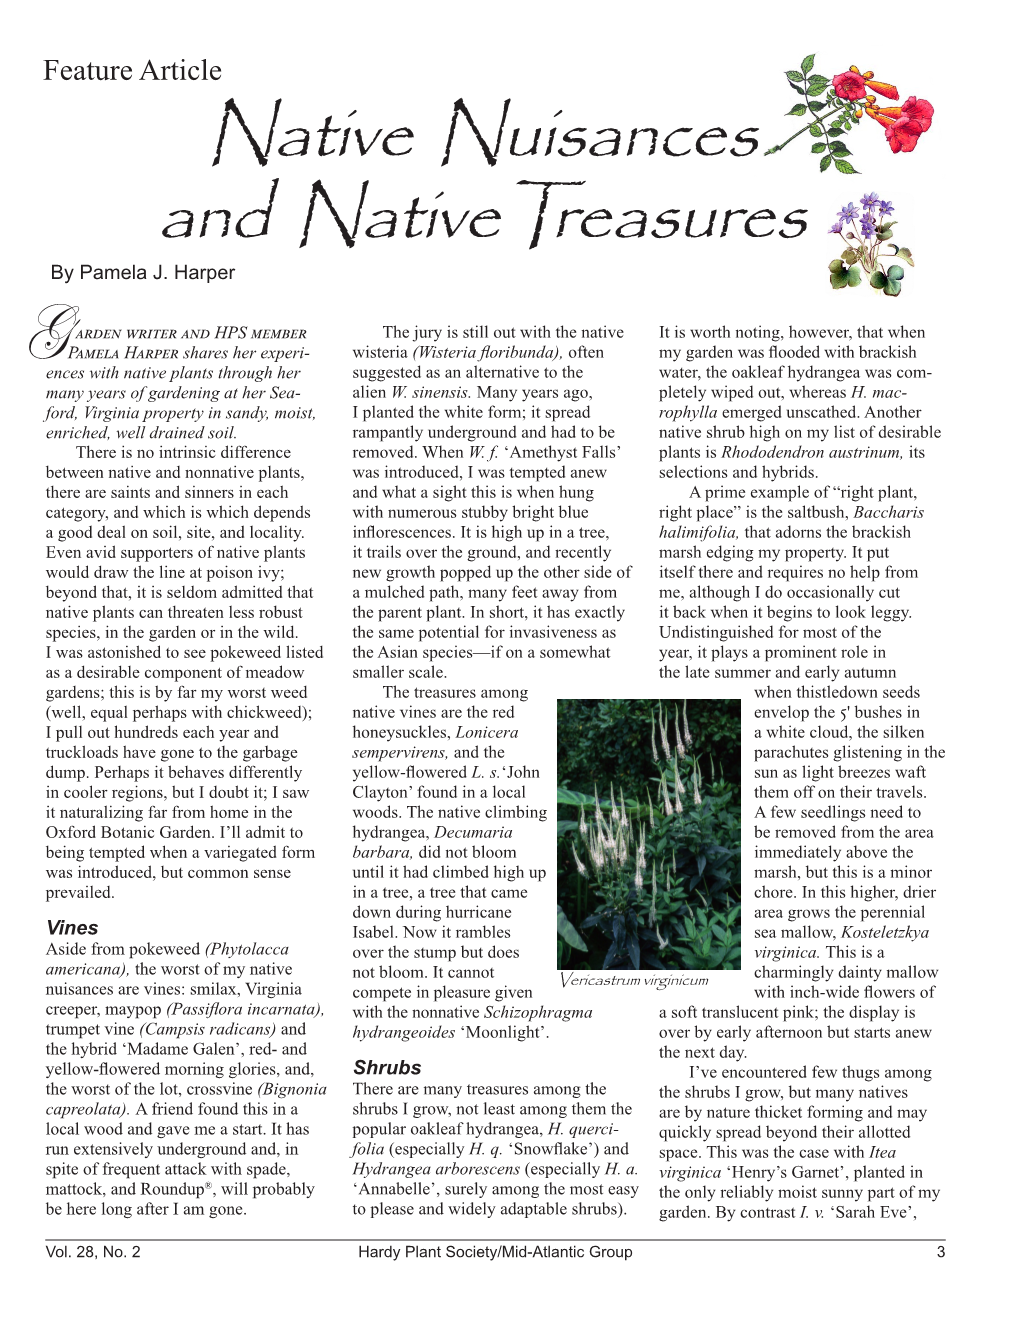 Native Nuisances and Native Treasures by Pamela J